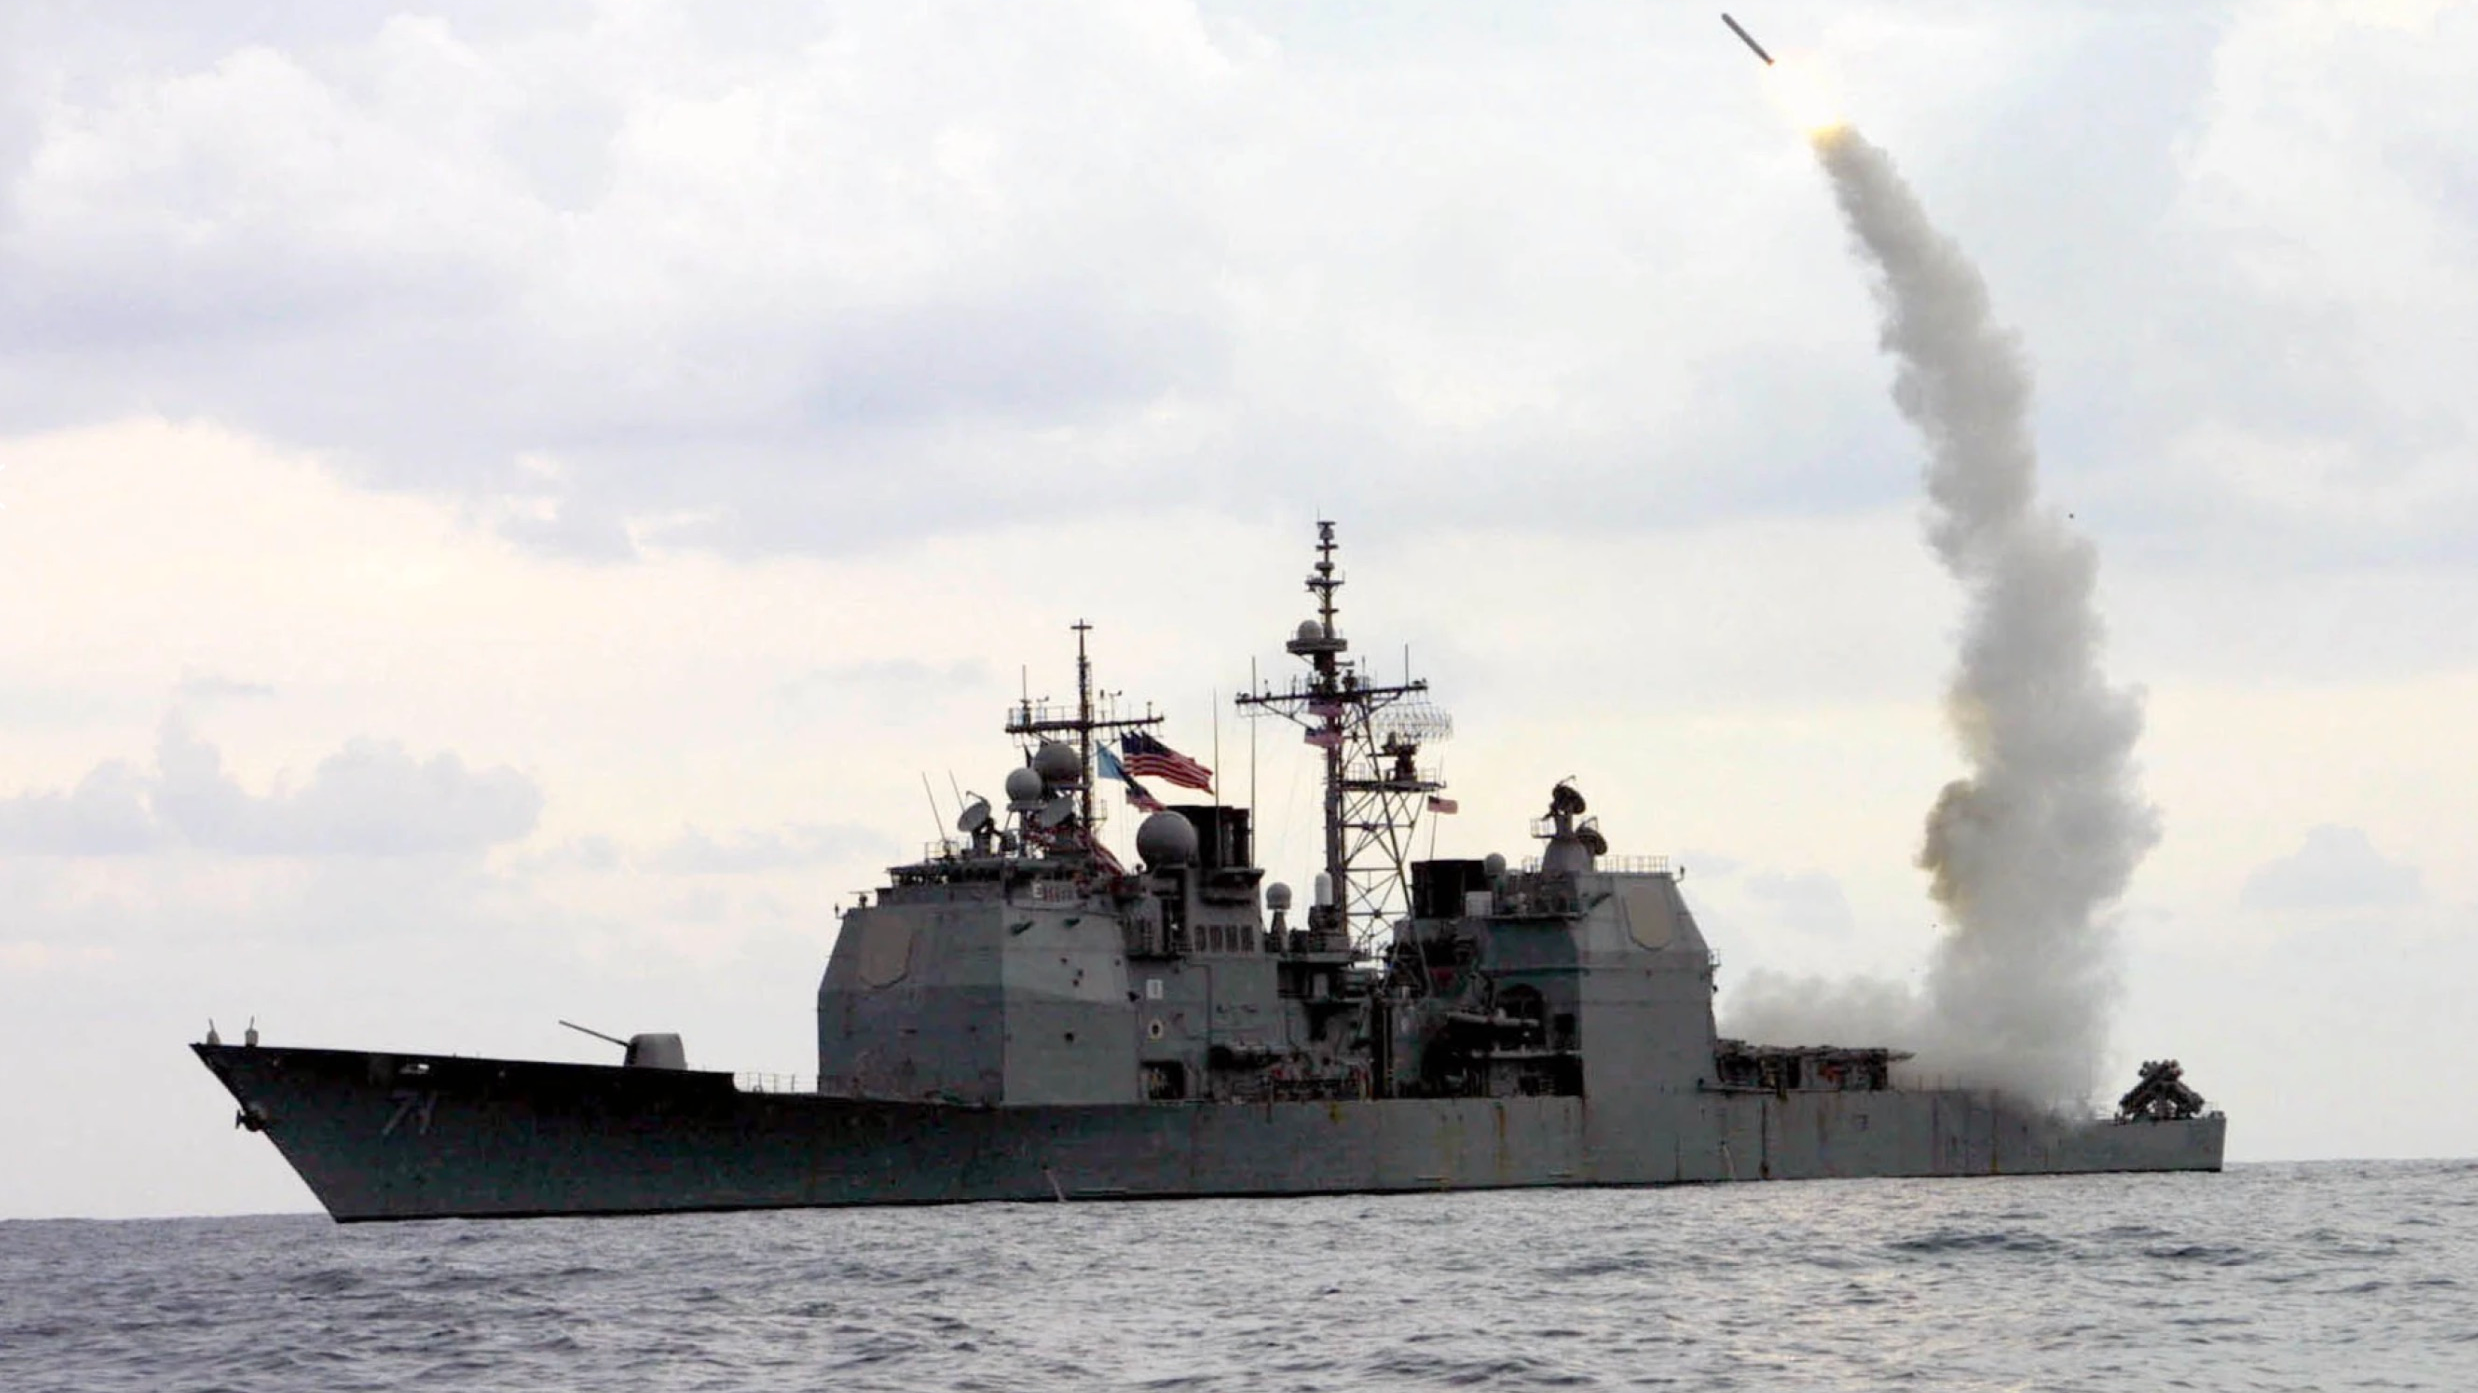 A Tomahawk Land Attack Missile (TLAM) launches from the guided missile cruiser USS Cape St. George (CG71), in operation in the Mediterranean Sea, March 23, 2023. /AP